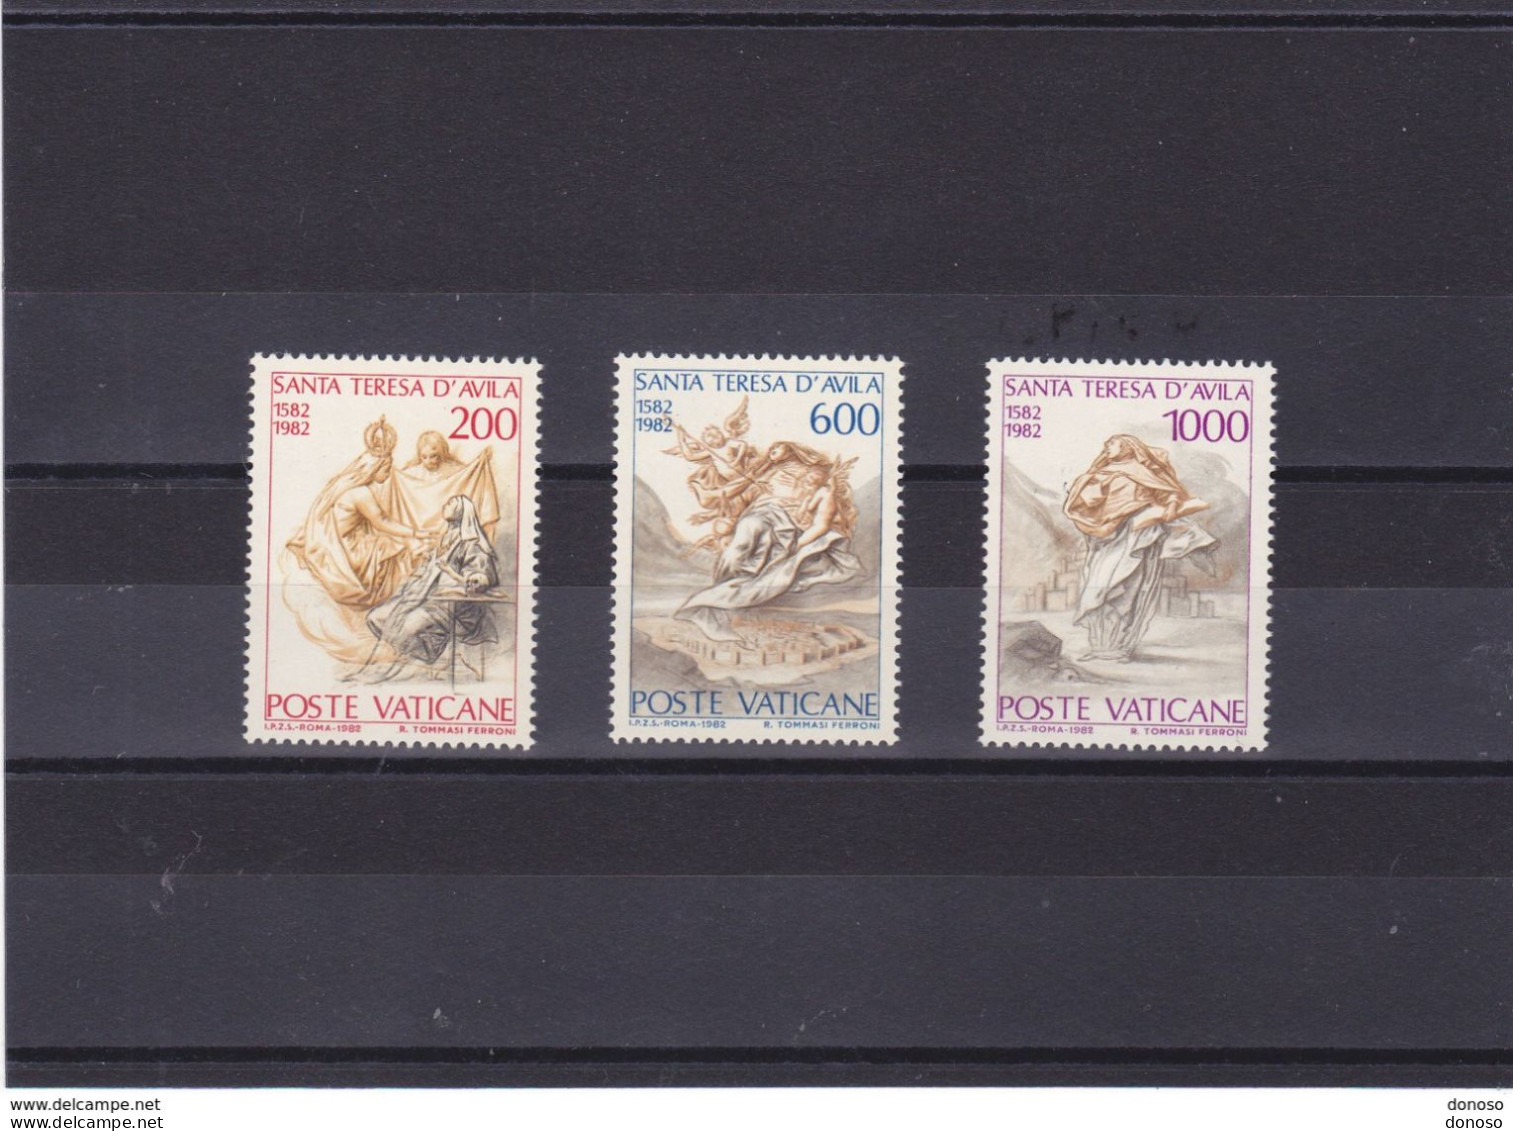 VATICAN 1982 THERESE D'AVILA Yvert 731-733, Michel 808-810 NEUF** MNH Cote 3,75 Euros - Unused Stamps